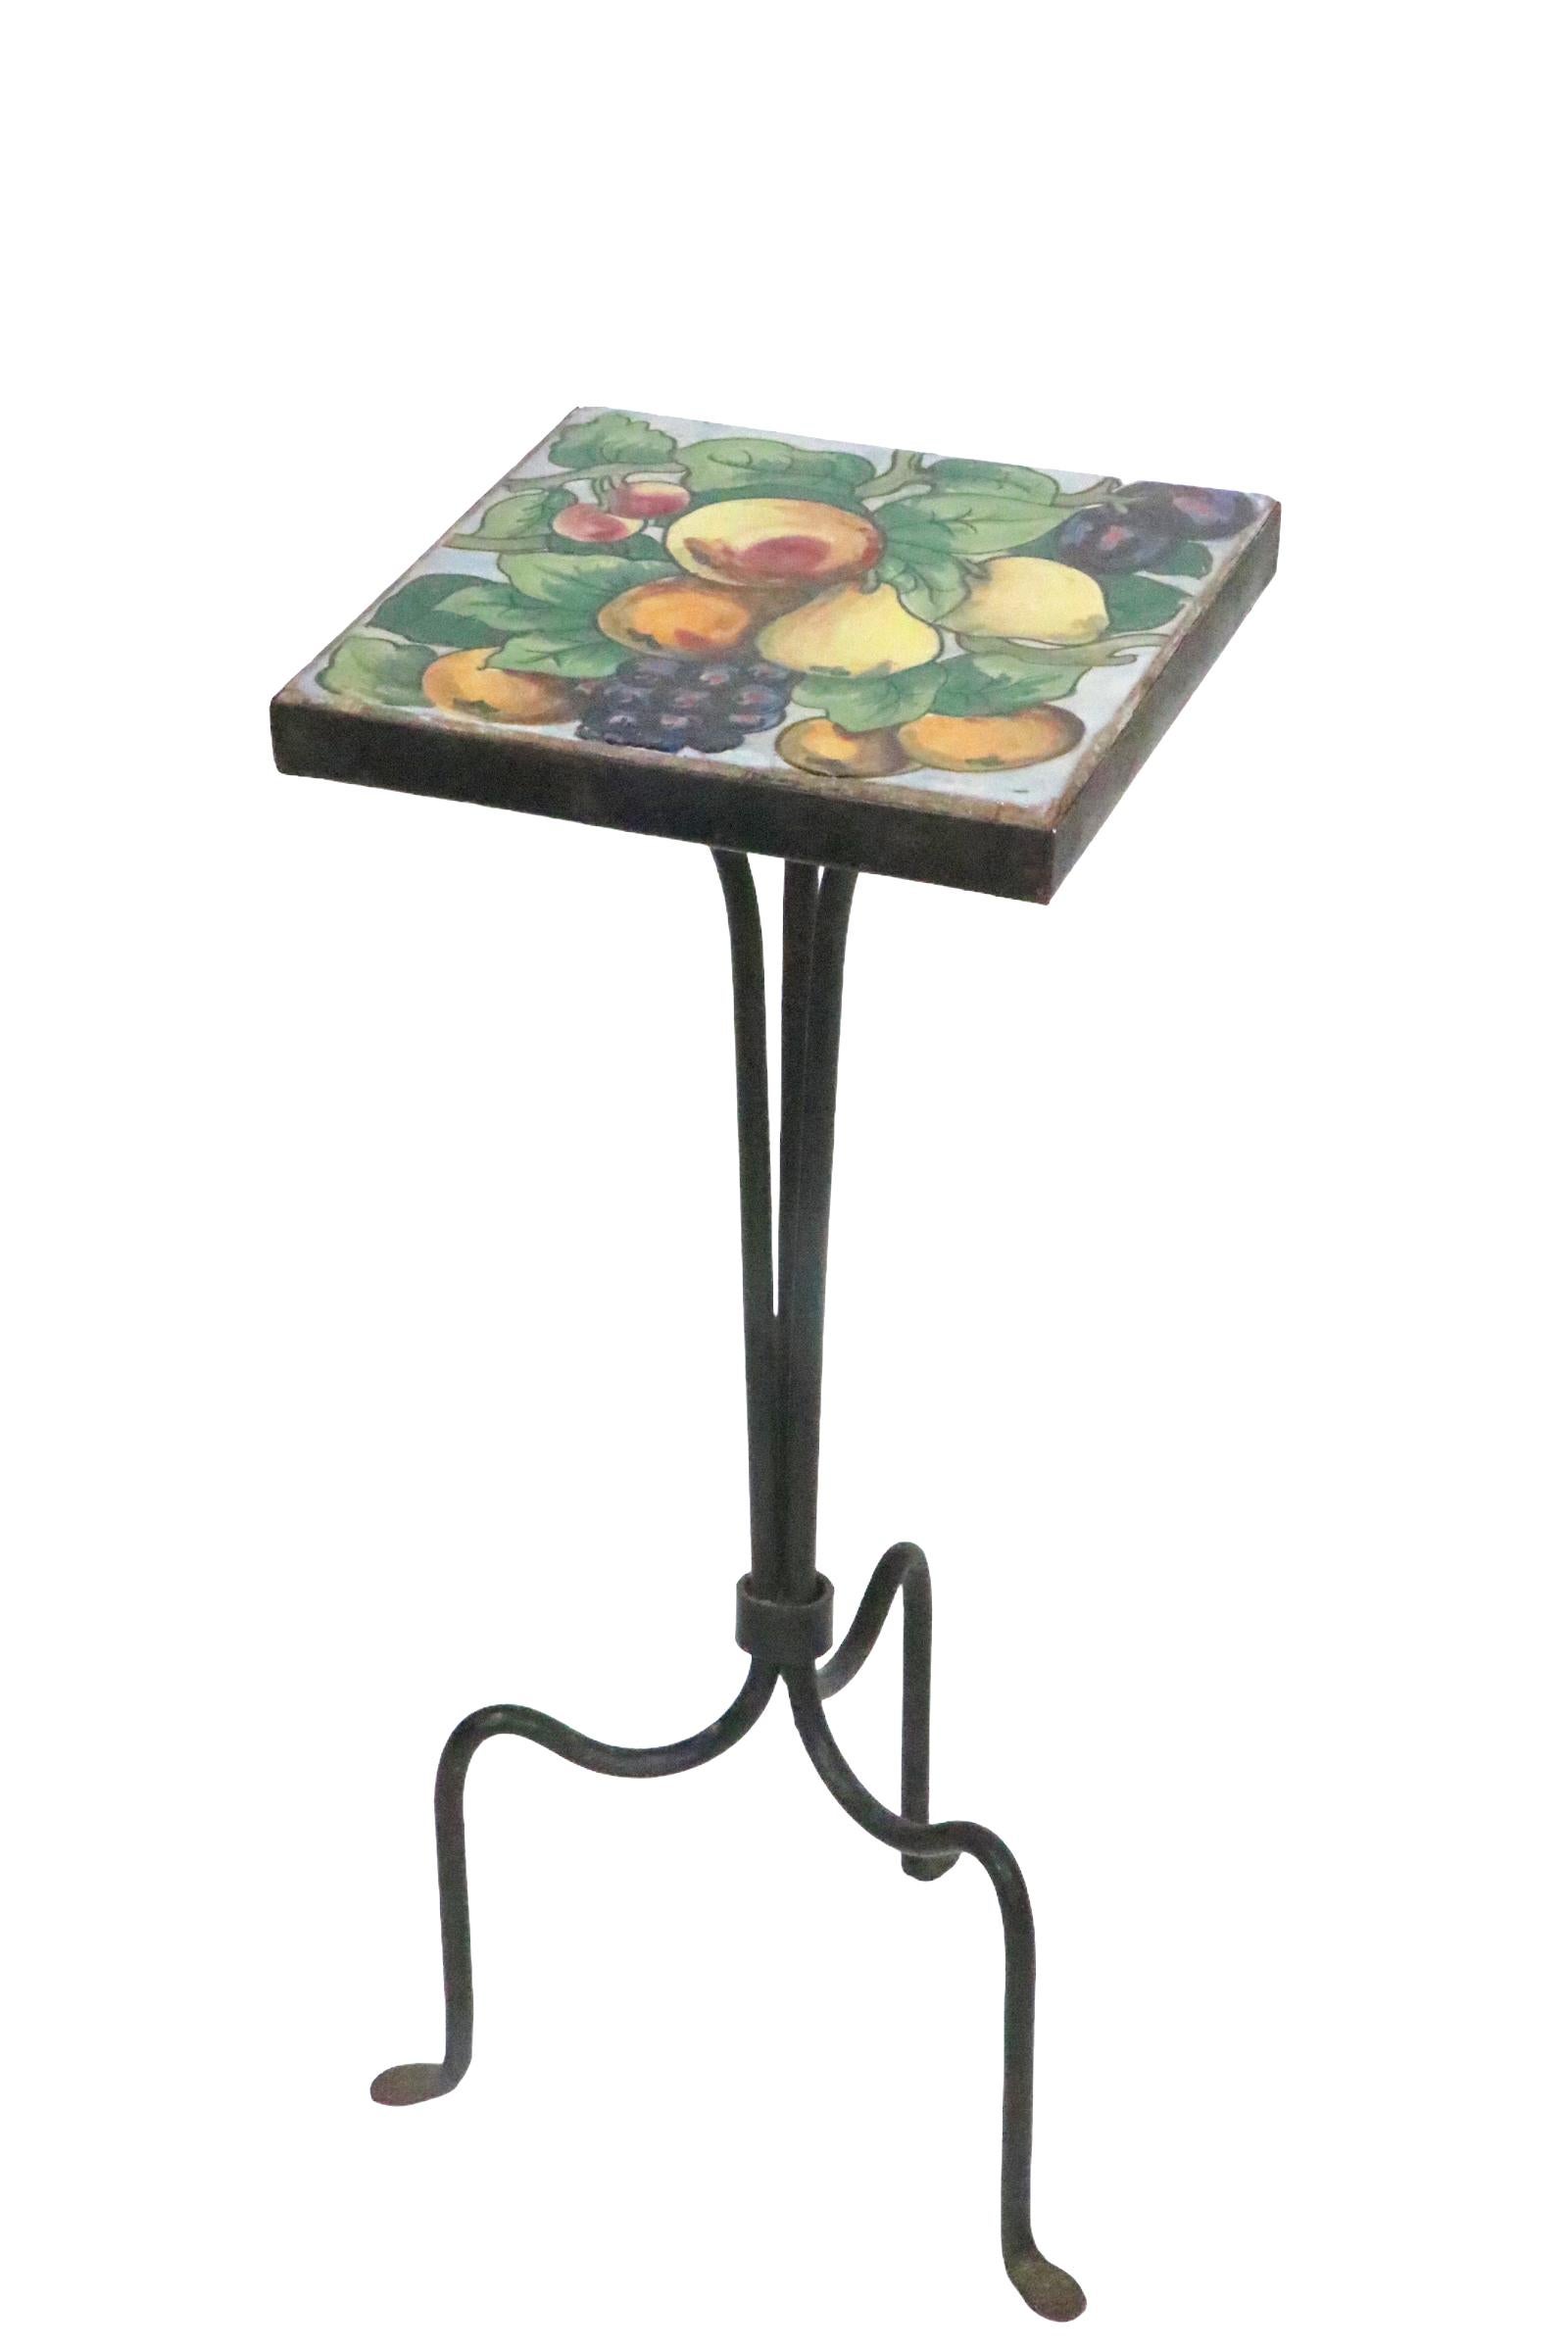 Art Deco Wrought iron and Tile Top Table att. to Addison Mizner c 1920's For Sale